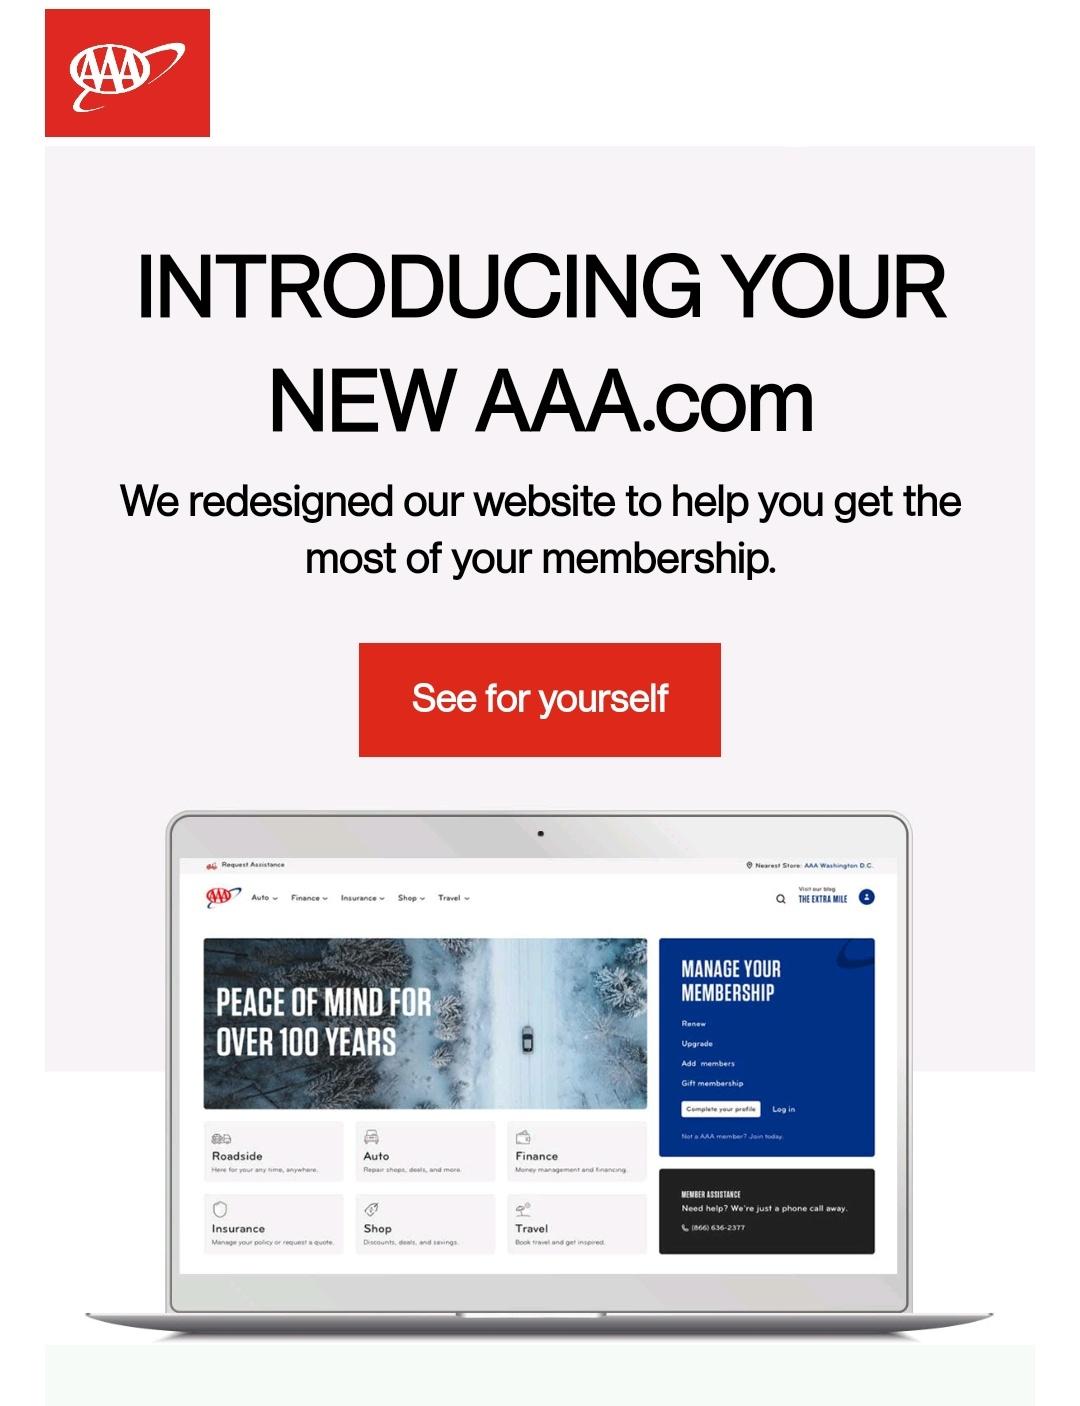 A screenshot of an email sent by AAA introducing their newly designed AAA.com